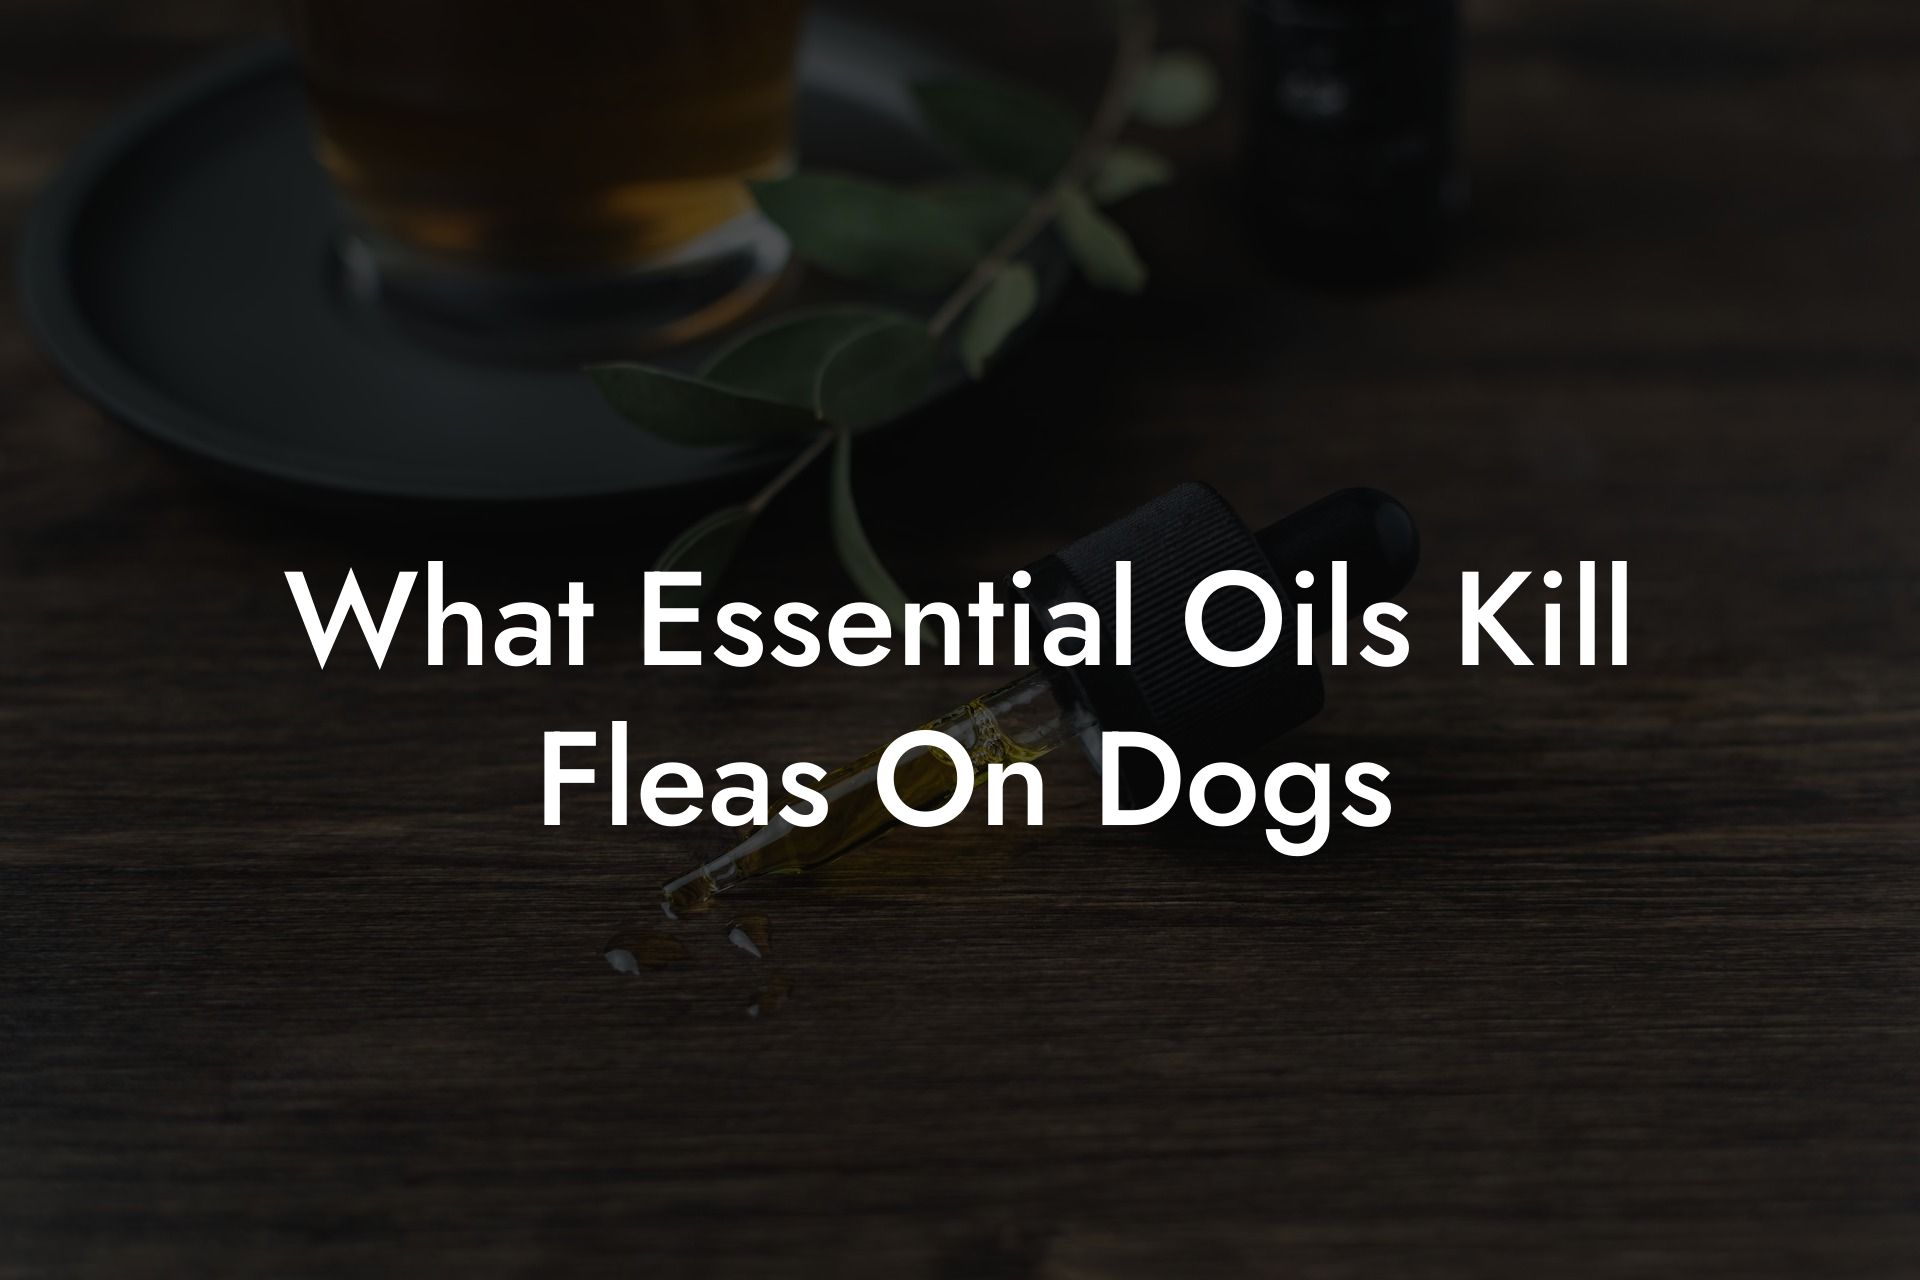 What Essential Oils Kill Fleas On Dogs